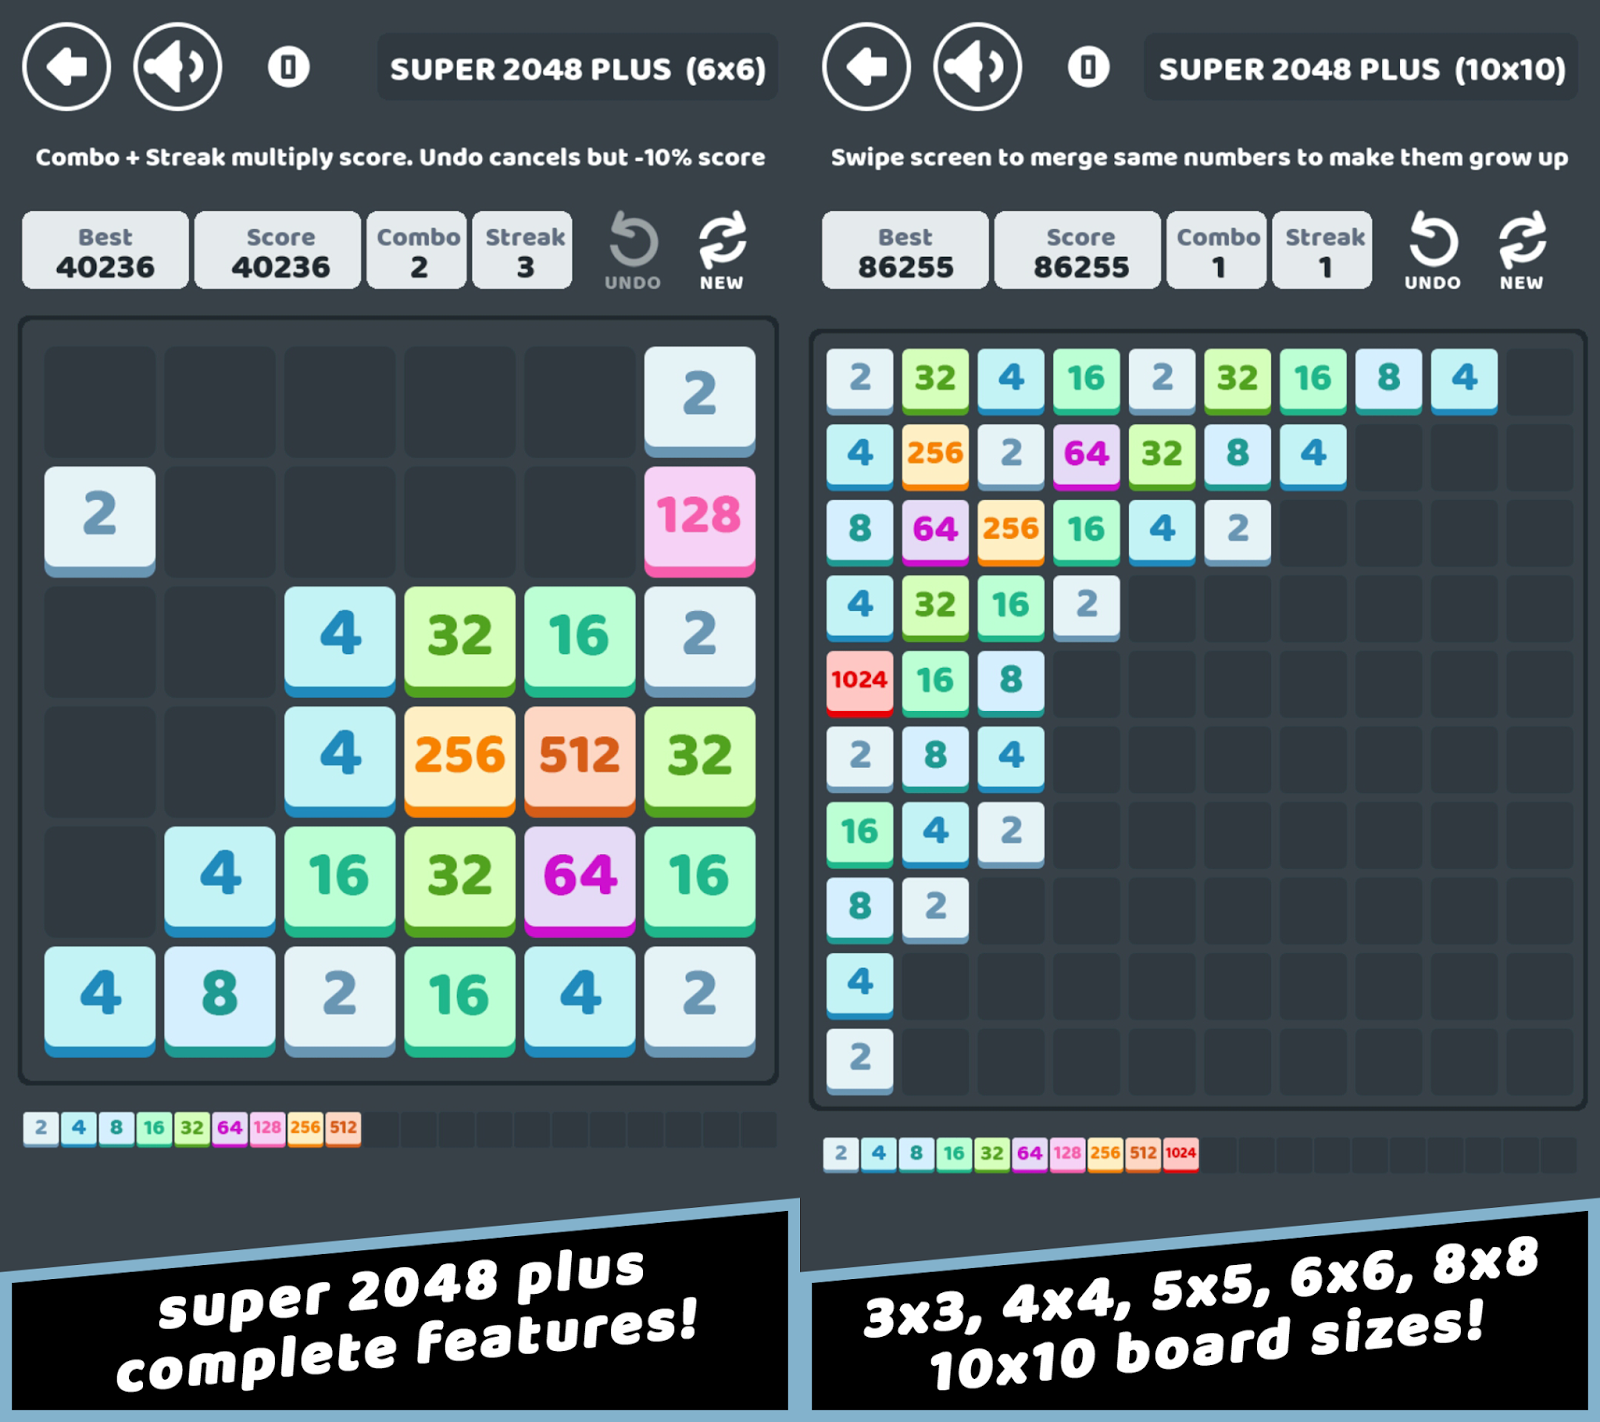 Super 2048 Plus, the most complete 2048 puzzle game released on Android ...